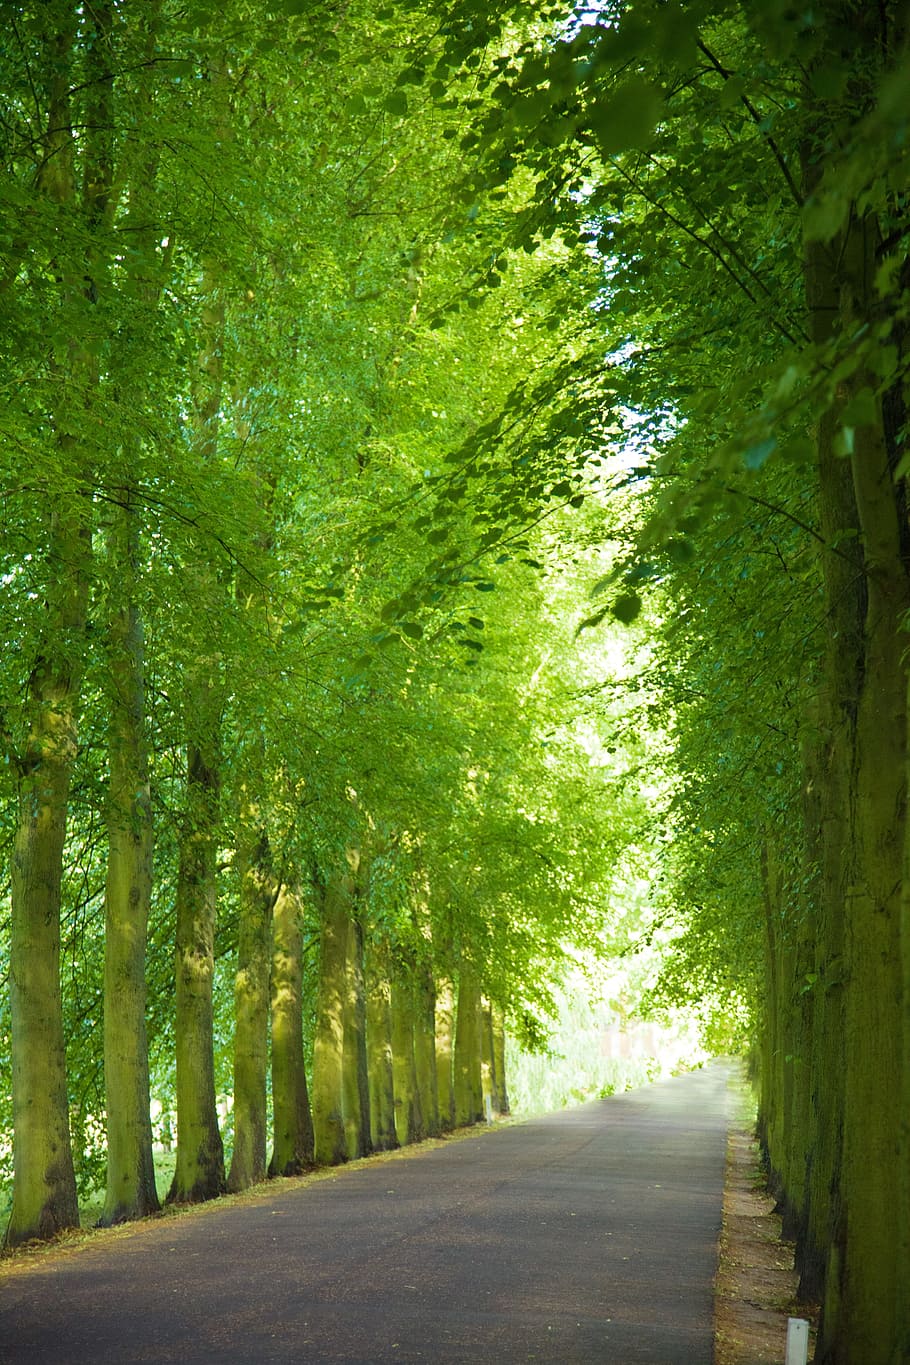 asphalt road, surrounded, green, trees, daytime, road, alley, avenue, canopy, landscape